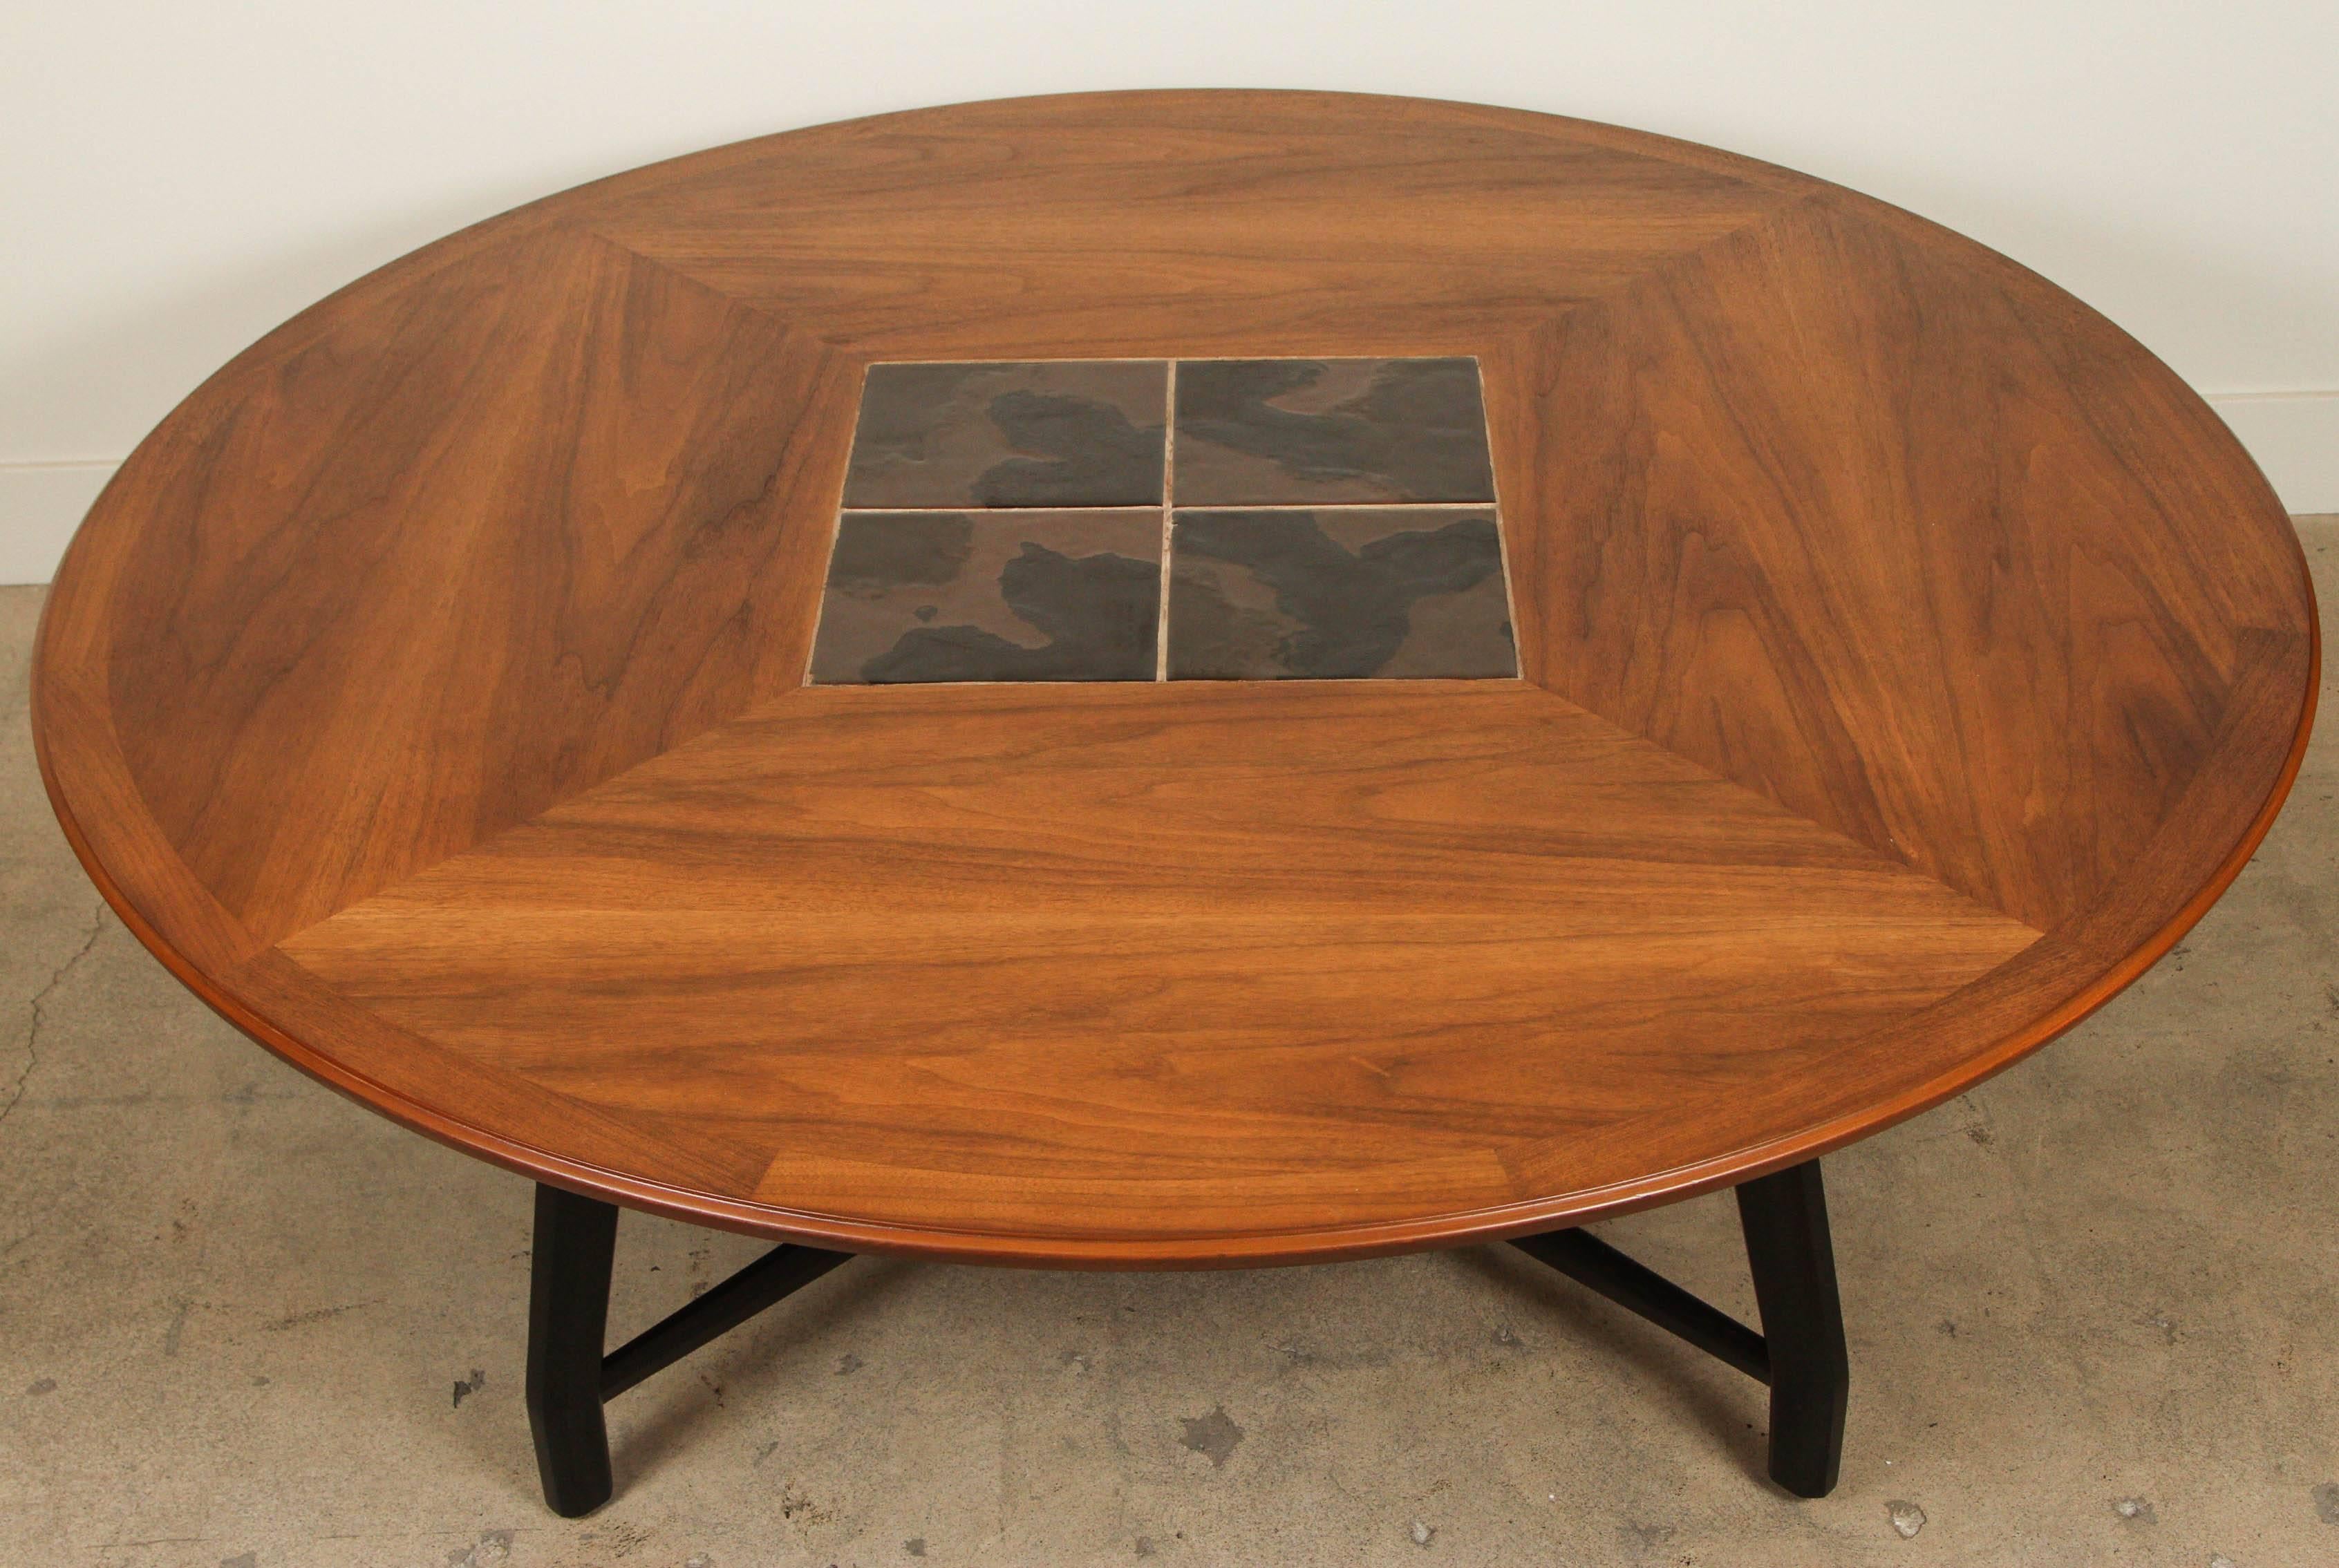 Mid-Century Modern Tile and Walnut Coffee Table Attributed to Edward Wormley for Dunbar